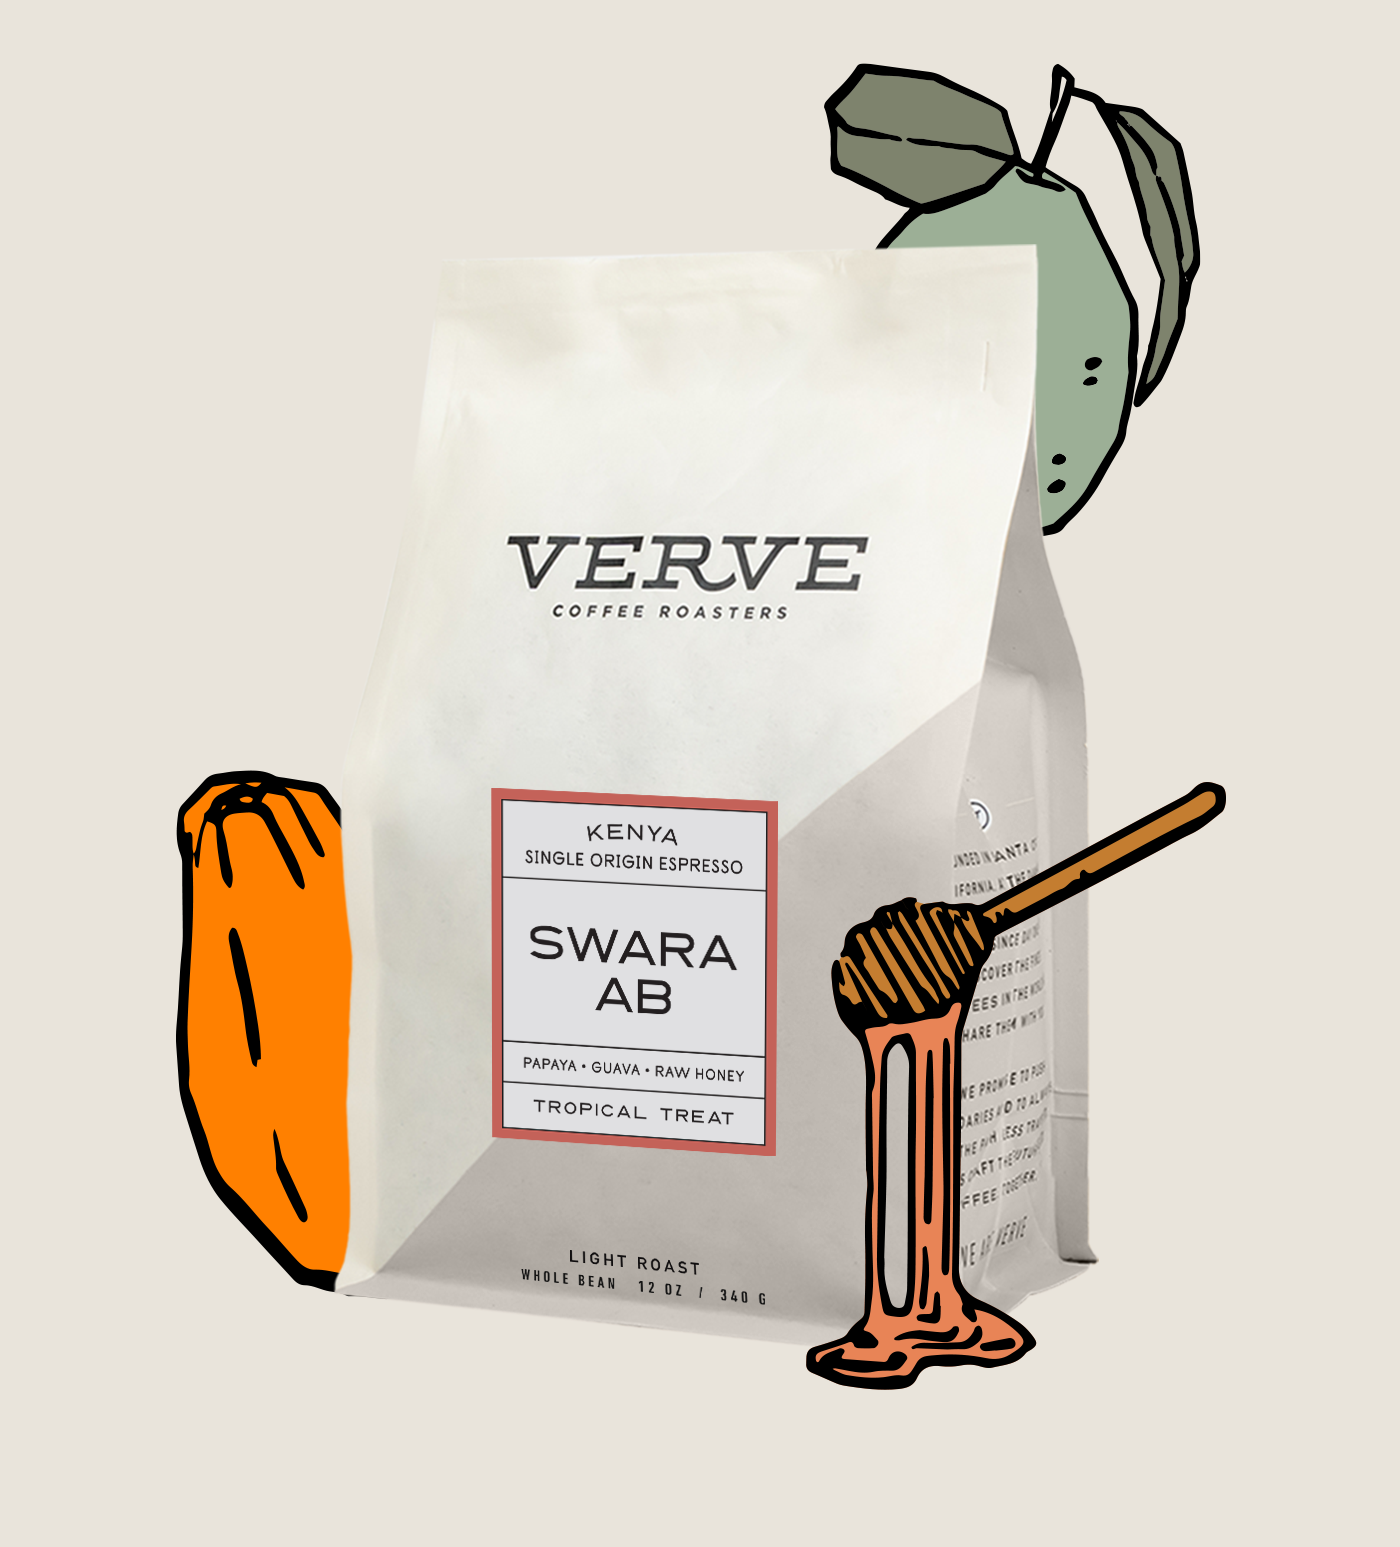 Swara AB Whole Bean with tasting notes